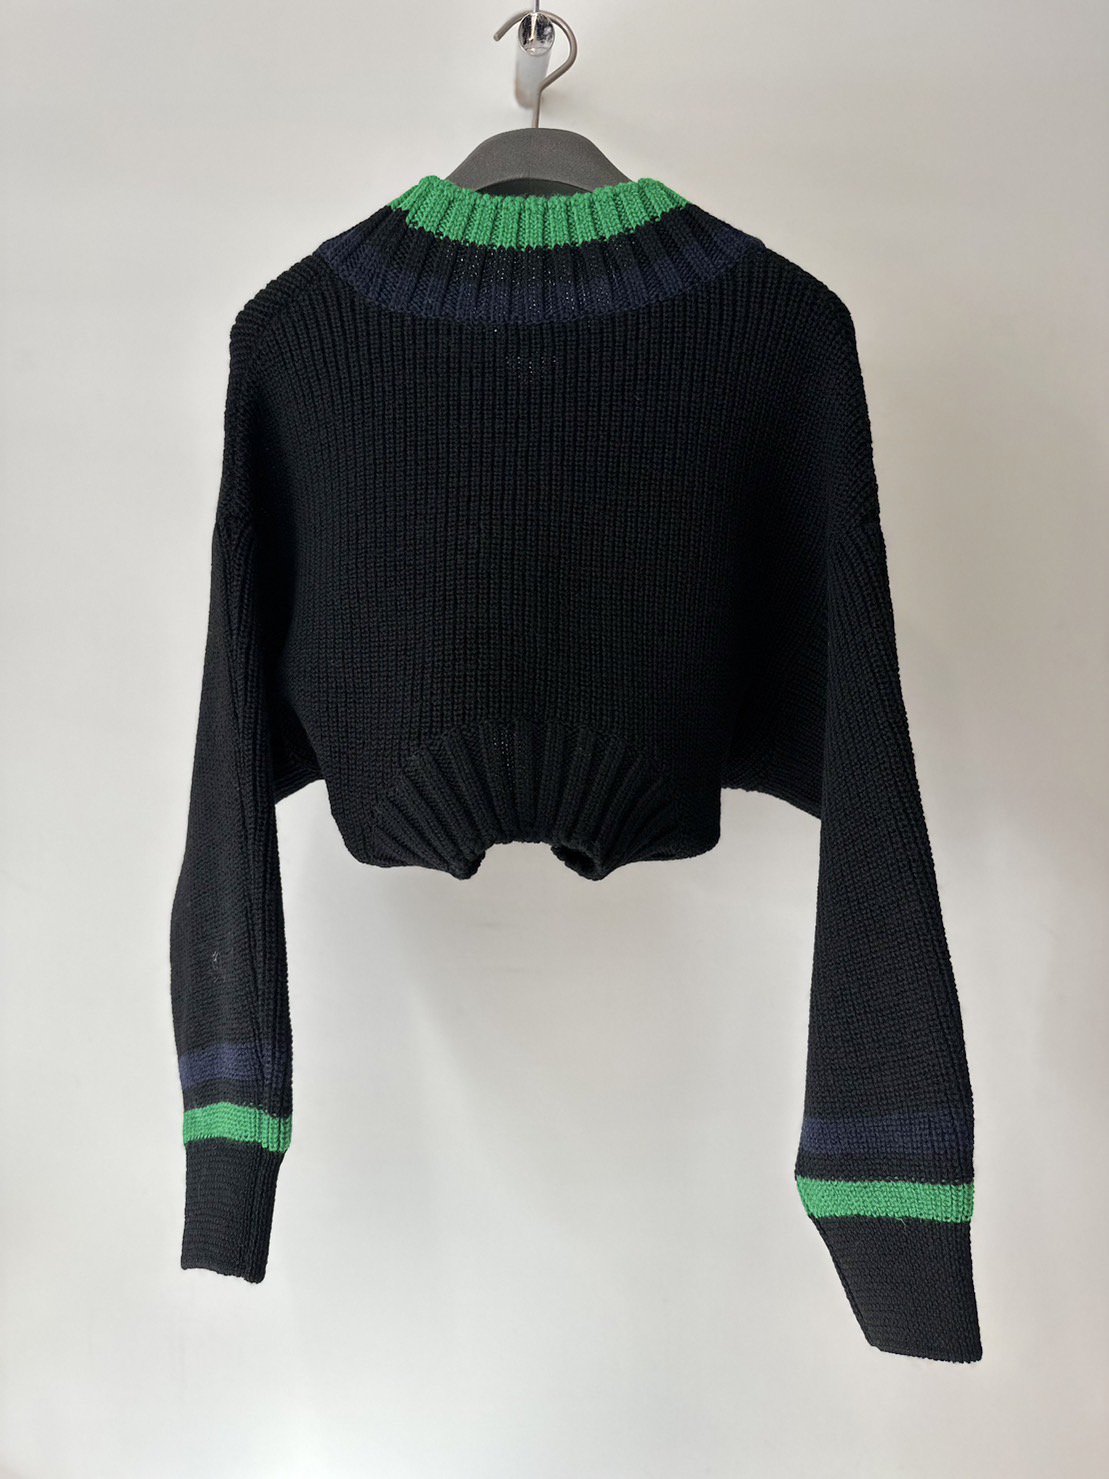 soduk<br />up side down knit top / black<img class='new_mark_img2' src='https://img.shop-pro.jp/img/new/icons14.gif' style='border:none;display:inline;margin:0px;padding:0px;width:auto;' />